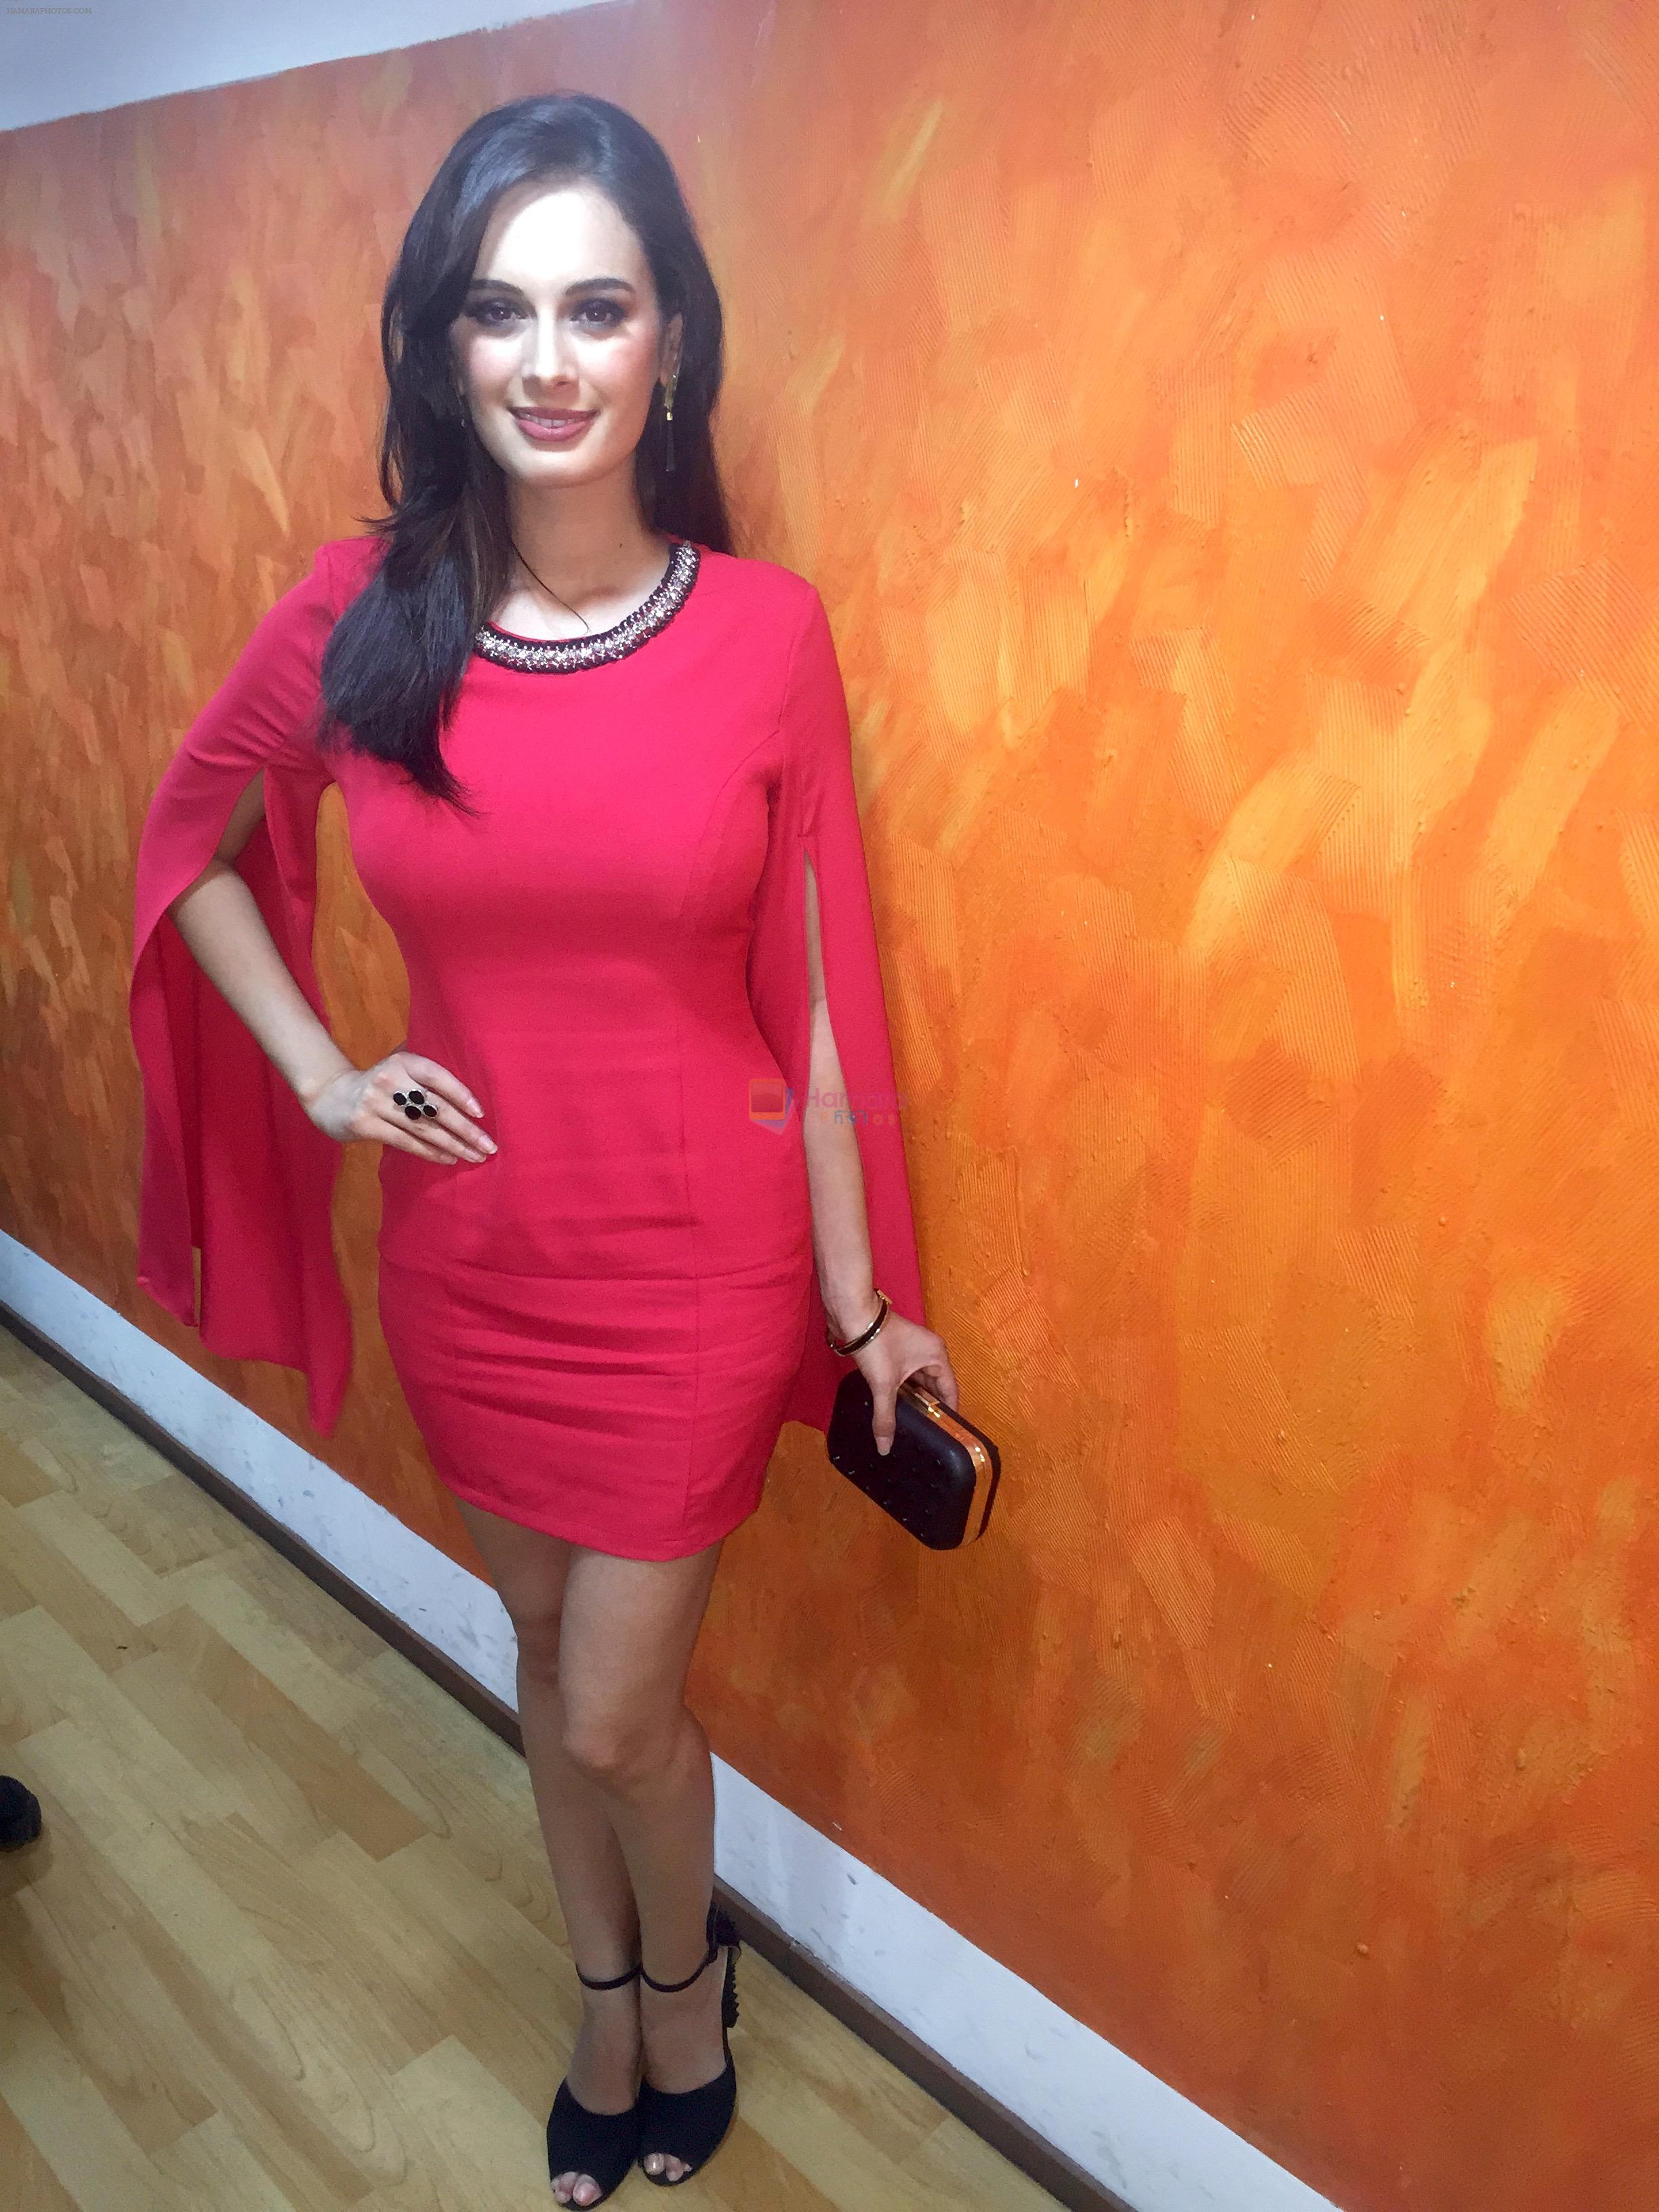 Evelyn Sharma at the promotional event for Kuch Kuch Locha hai